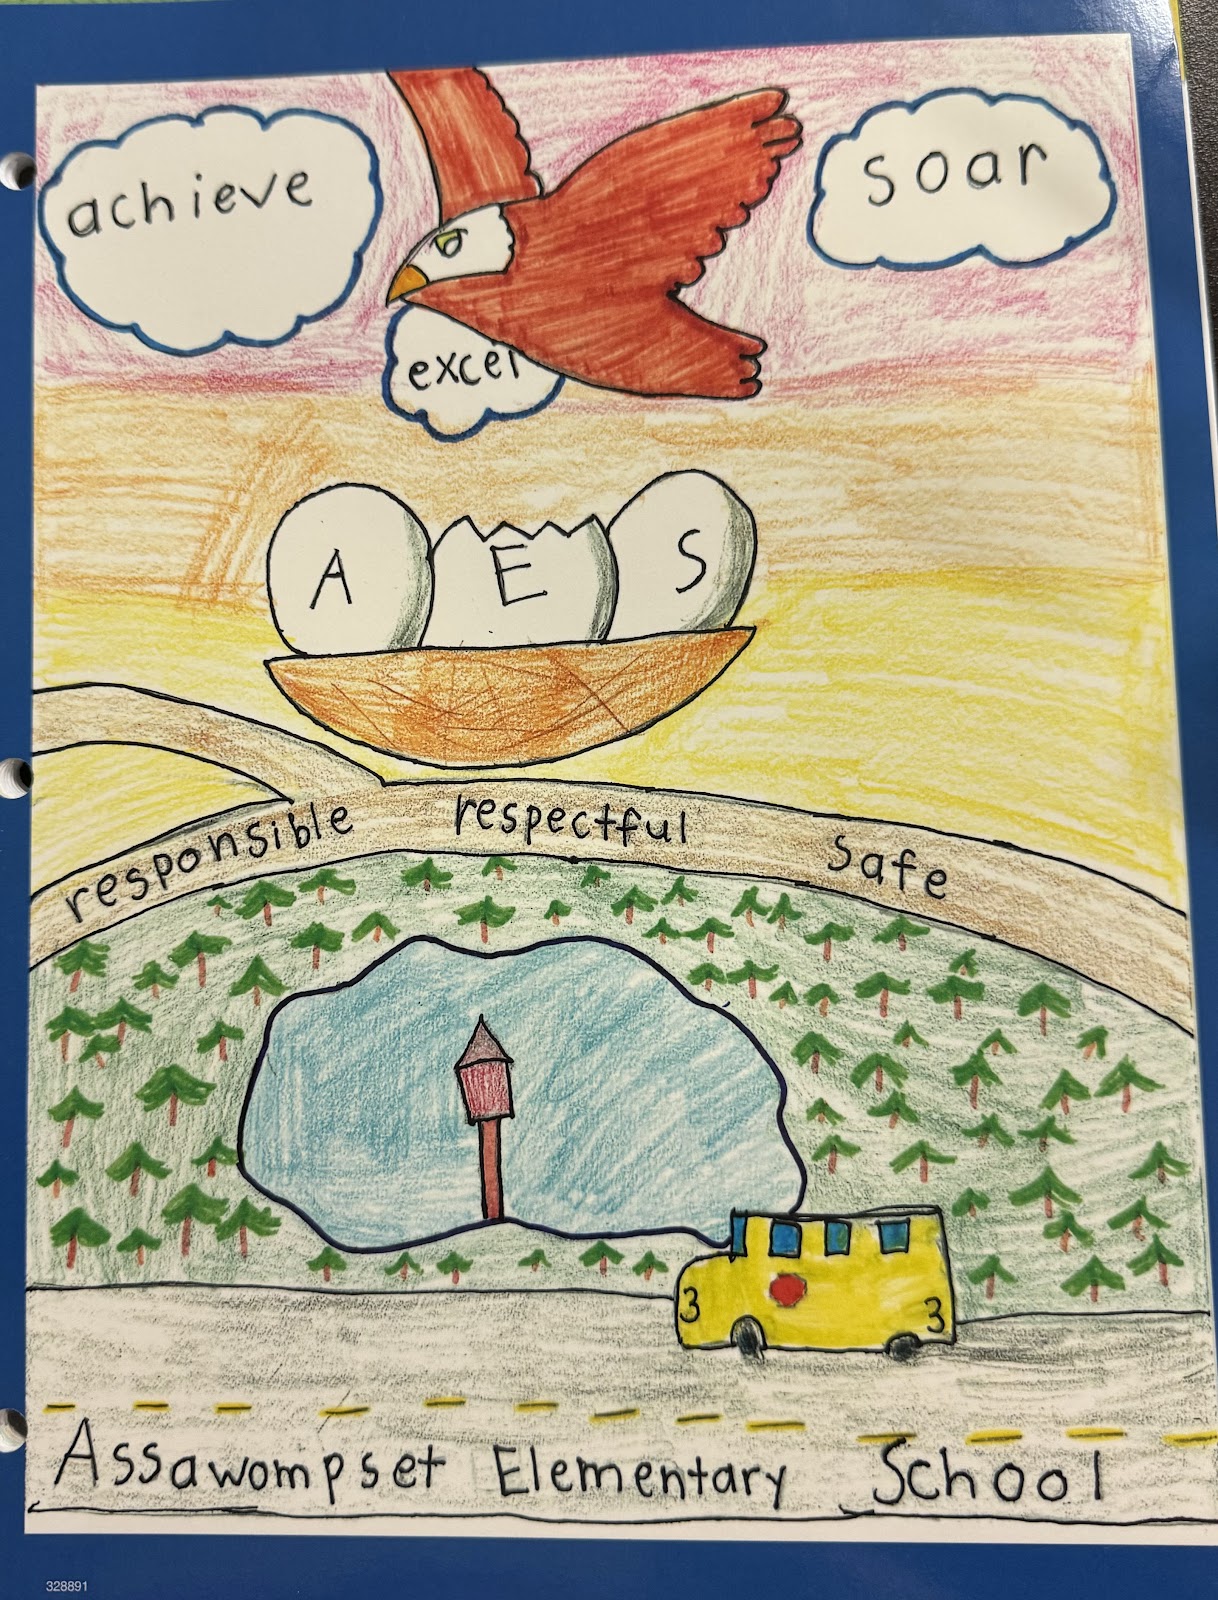 image of lasat year's agenda cover contest of an eagle flying over eggs and a park setting with text achieve, excel, soar